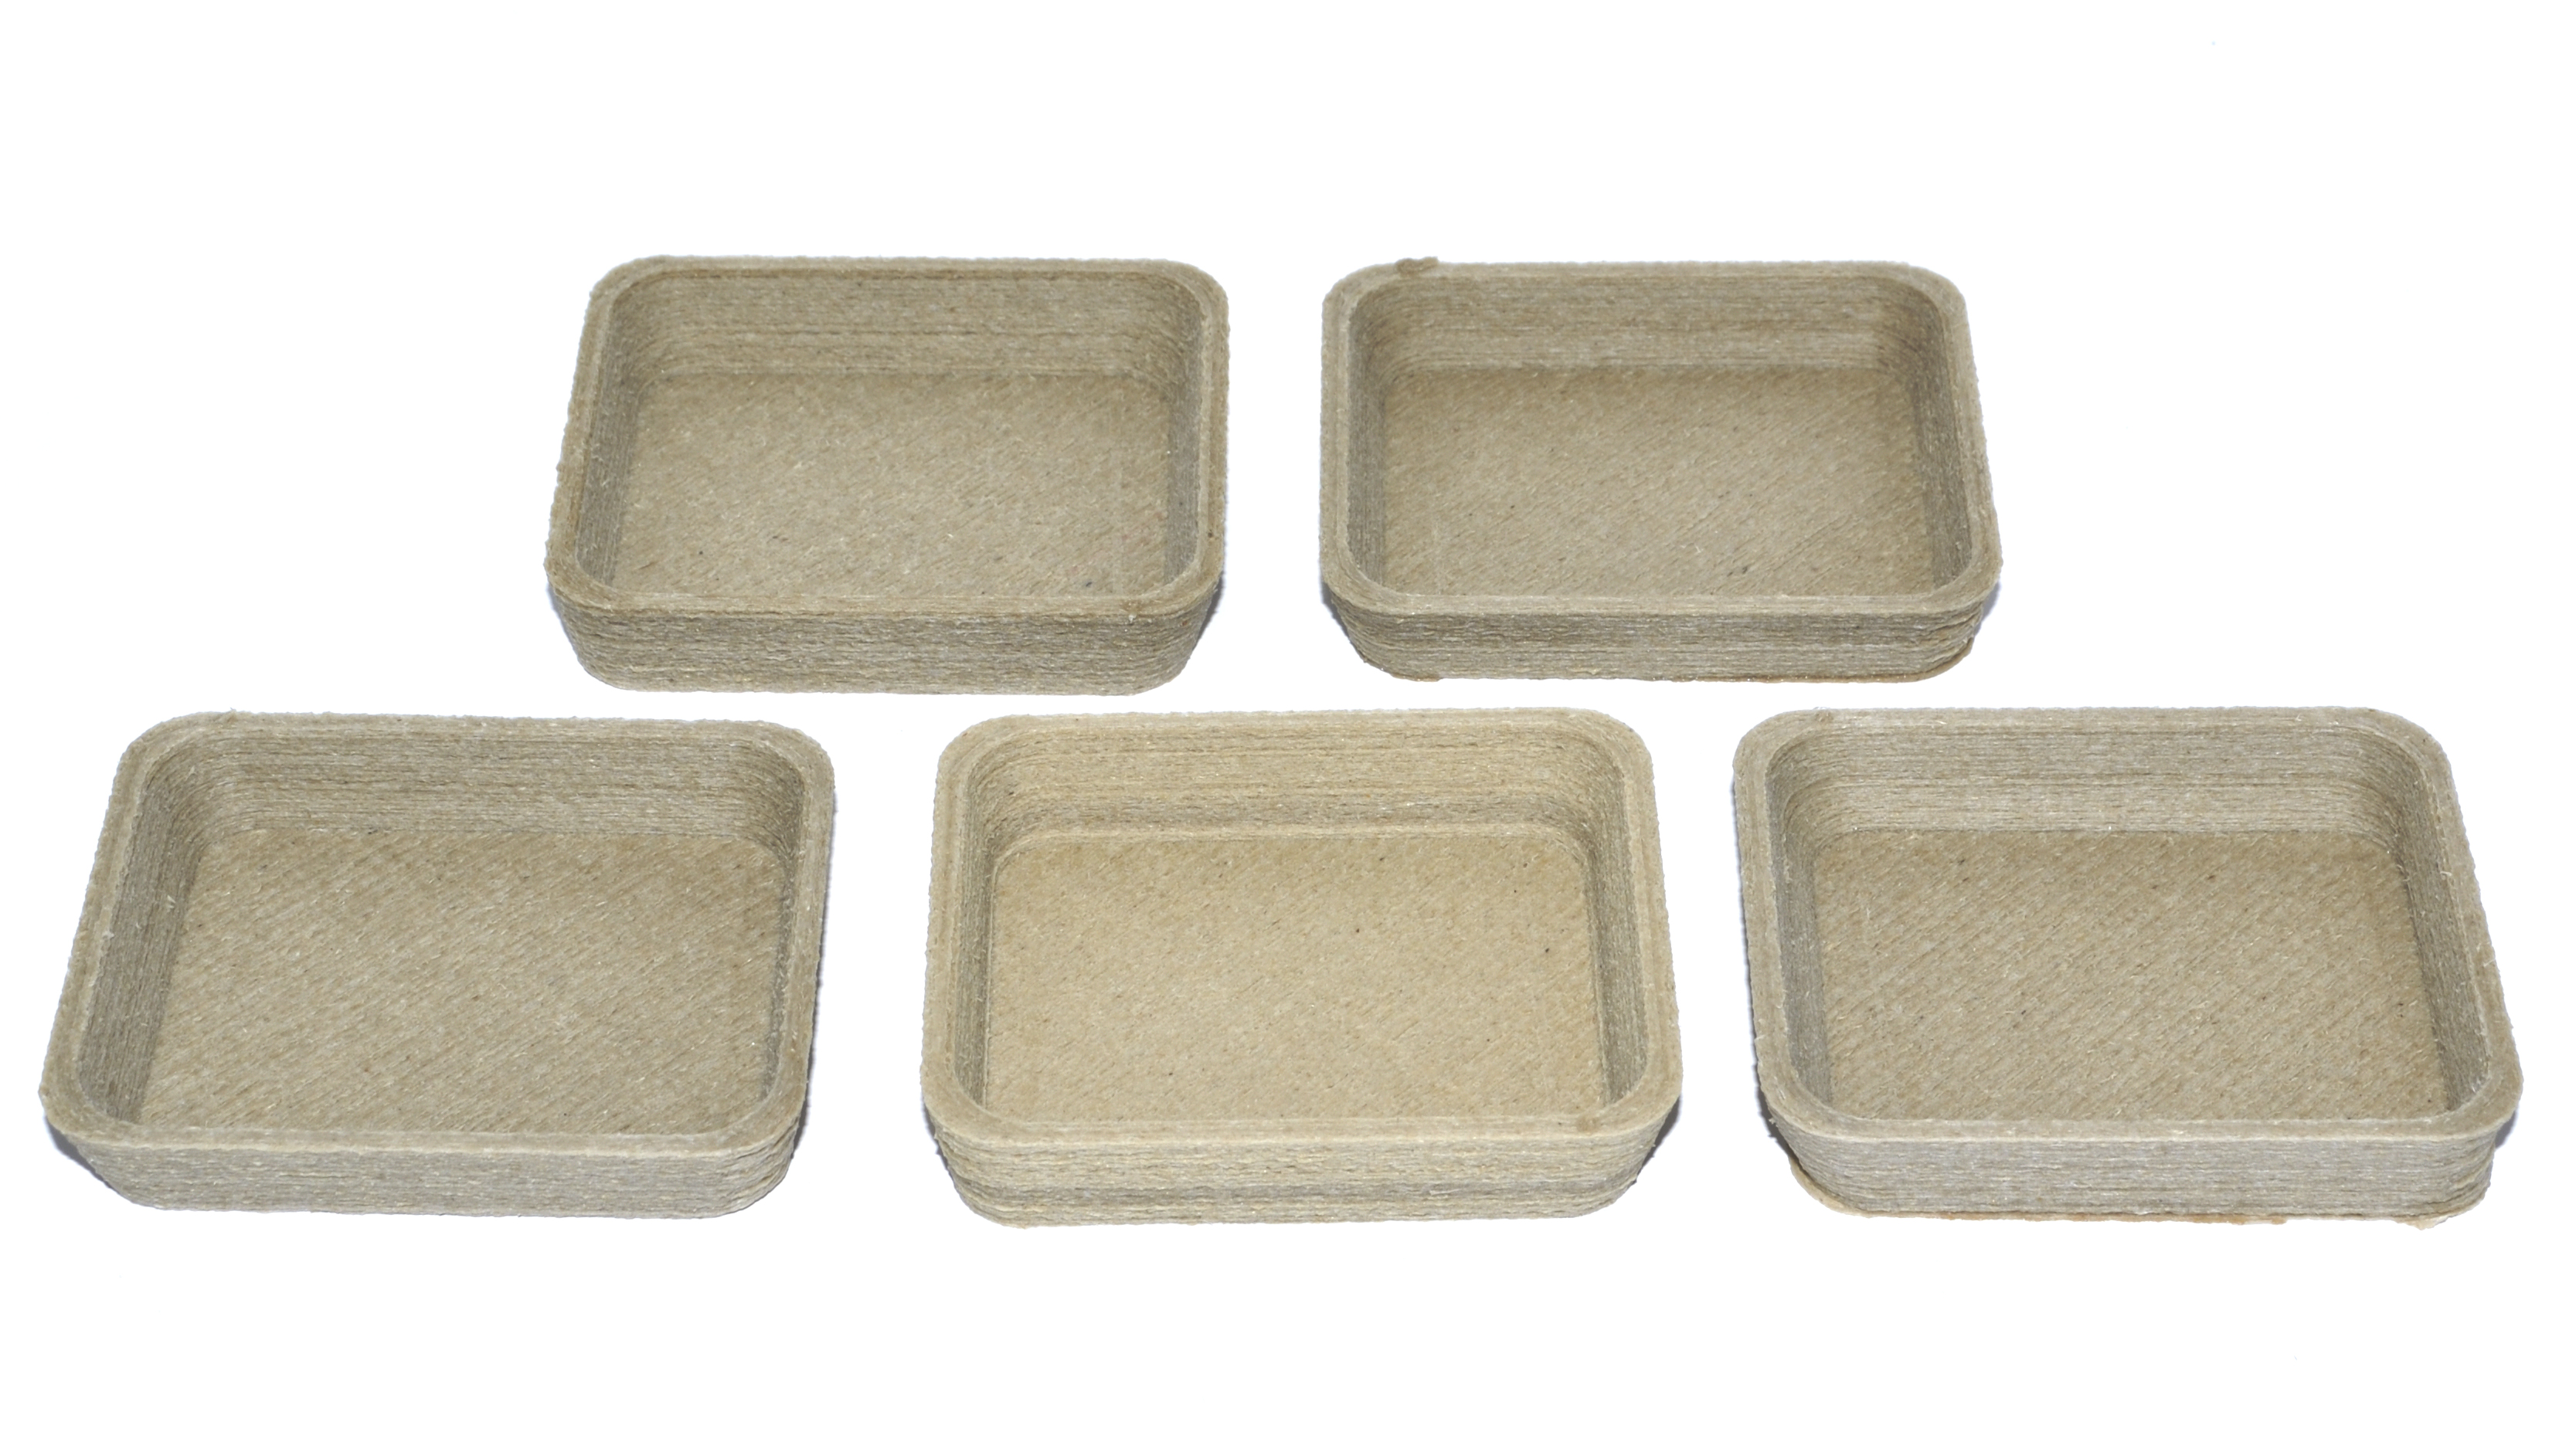 Trays made with 3D printing